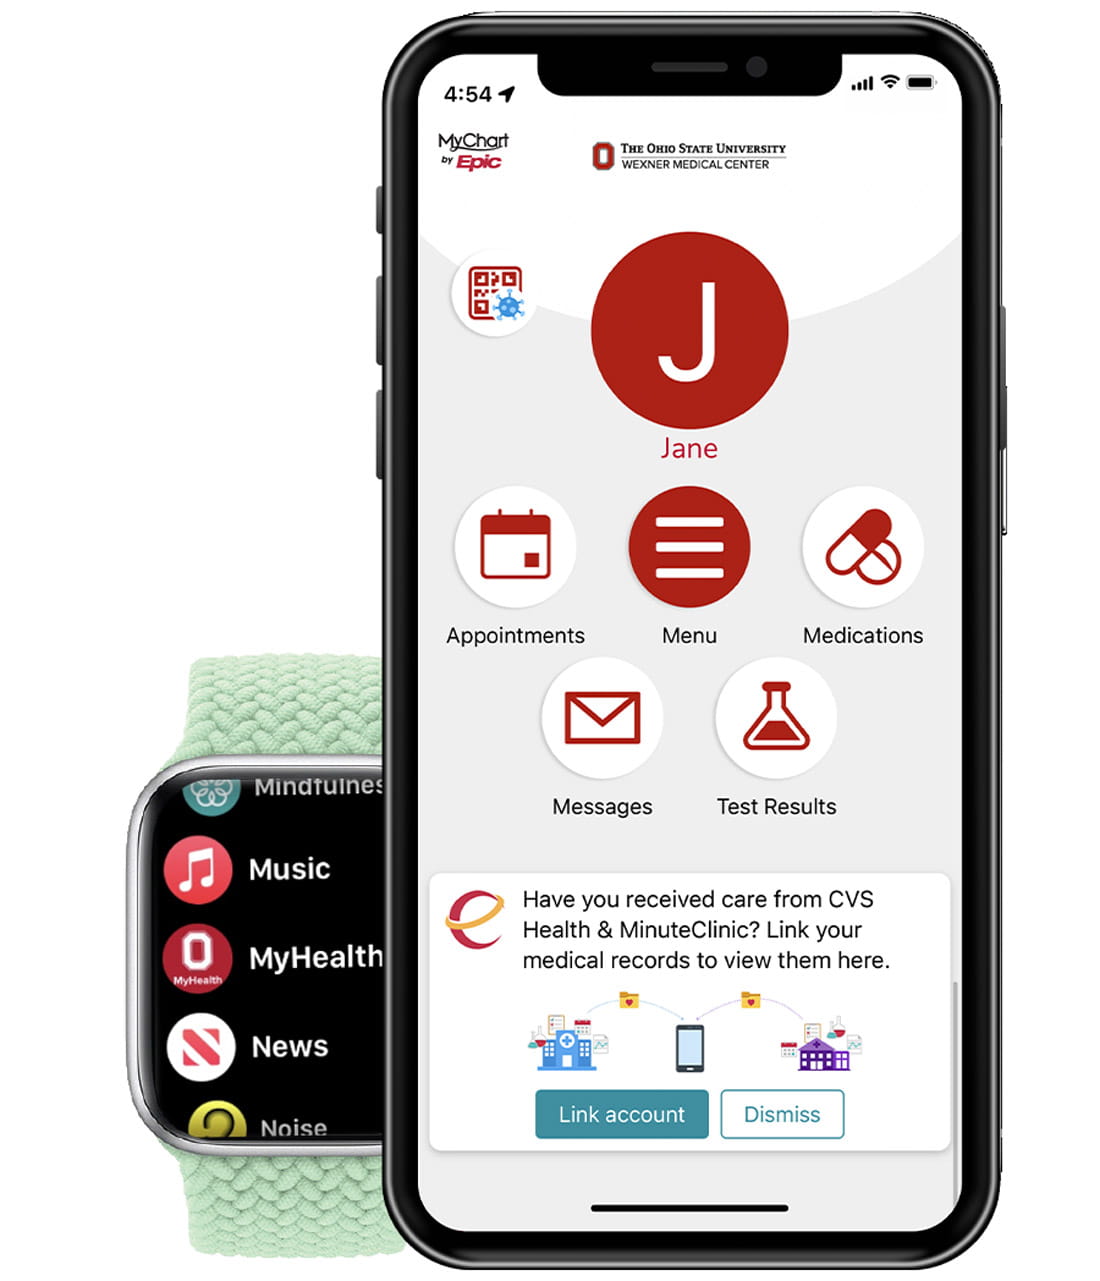 MyHealth mobile app and smart watch